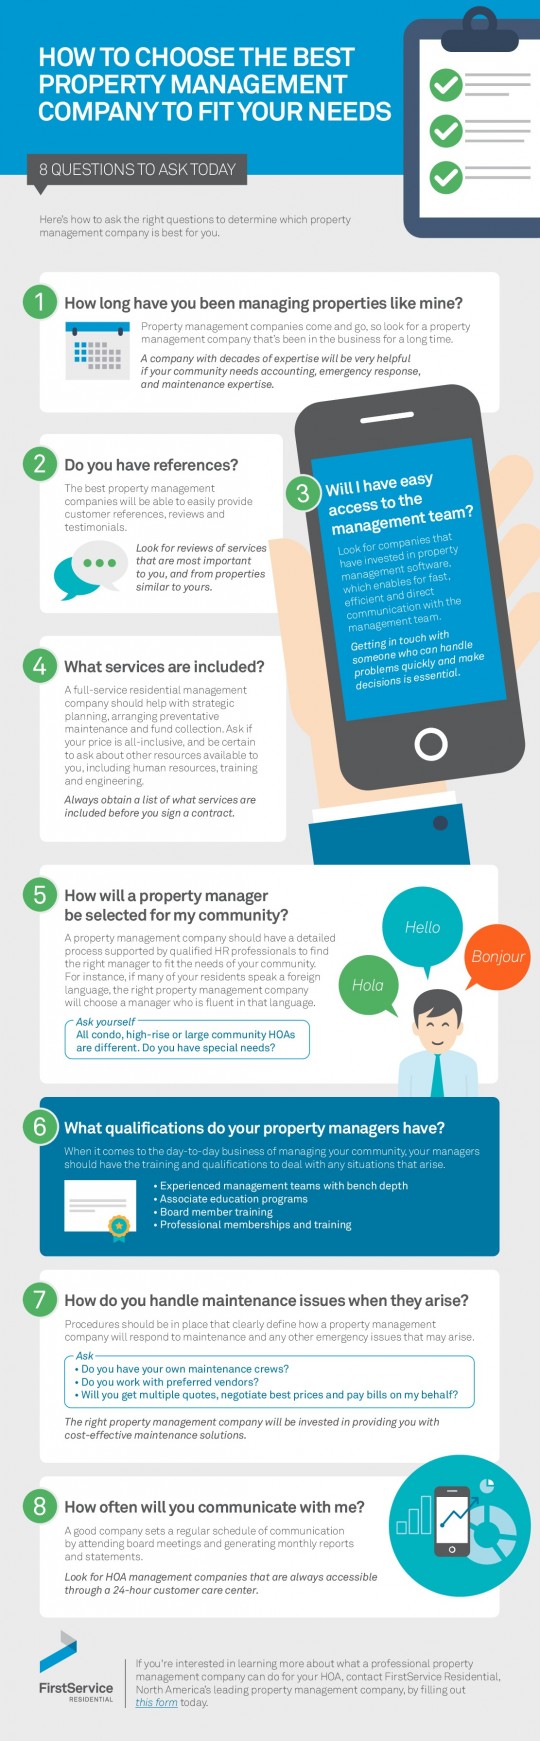 How to Choose the Best Property Management Company to Fit Your Needs